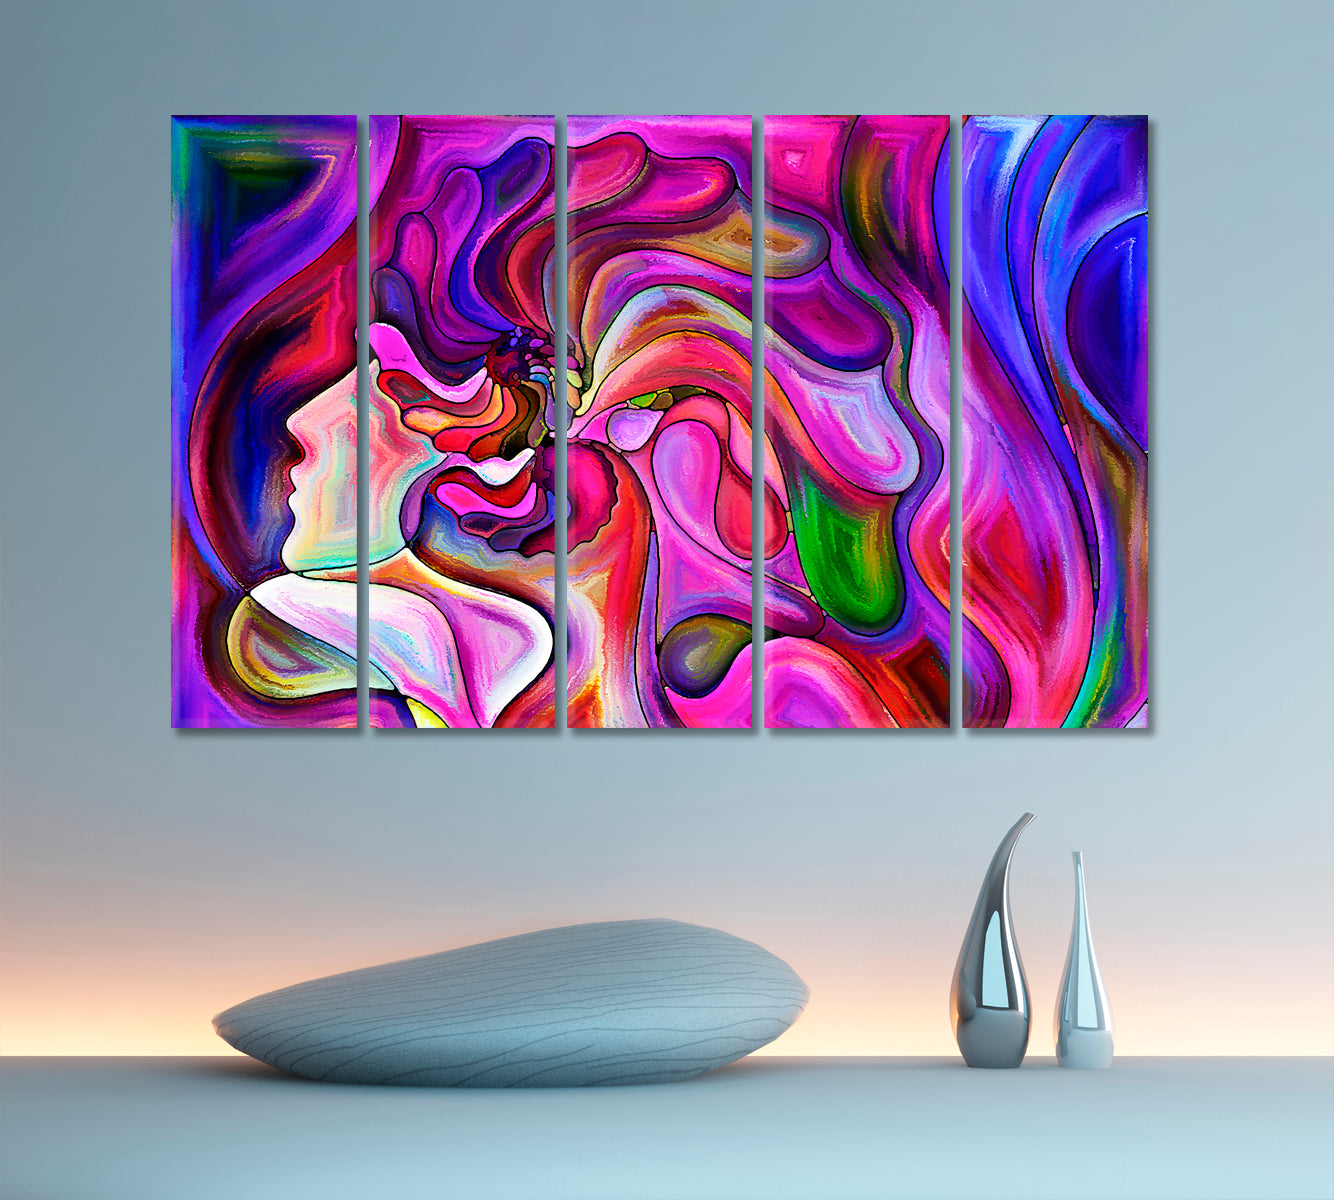 Vision In Colors And Lines Abstract Art Print Artesty 5 panels 36" x 24" 